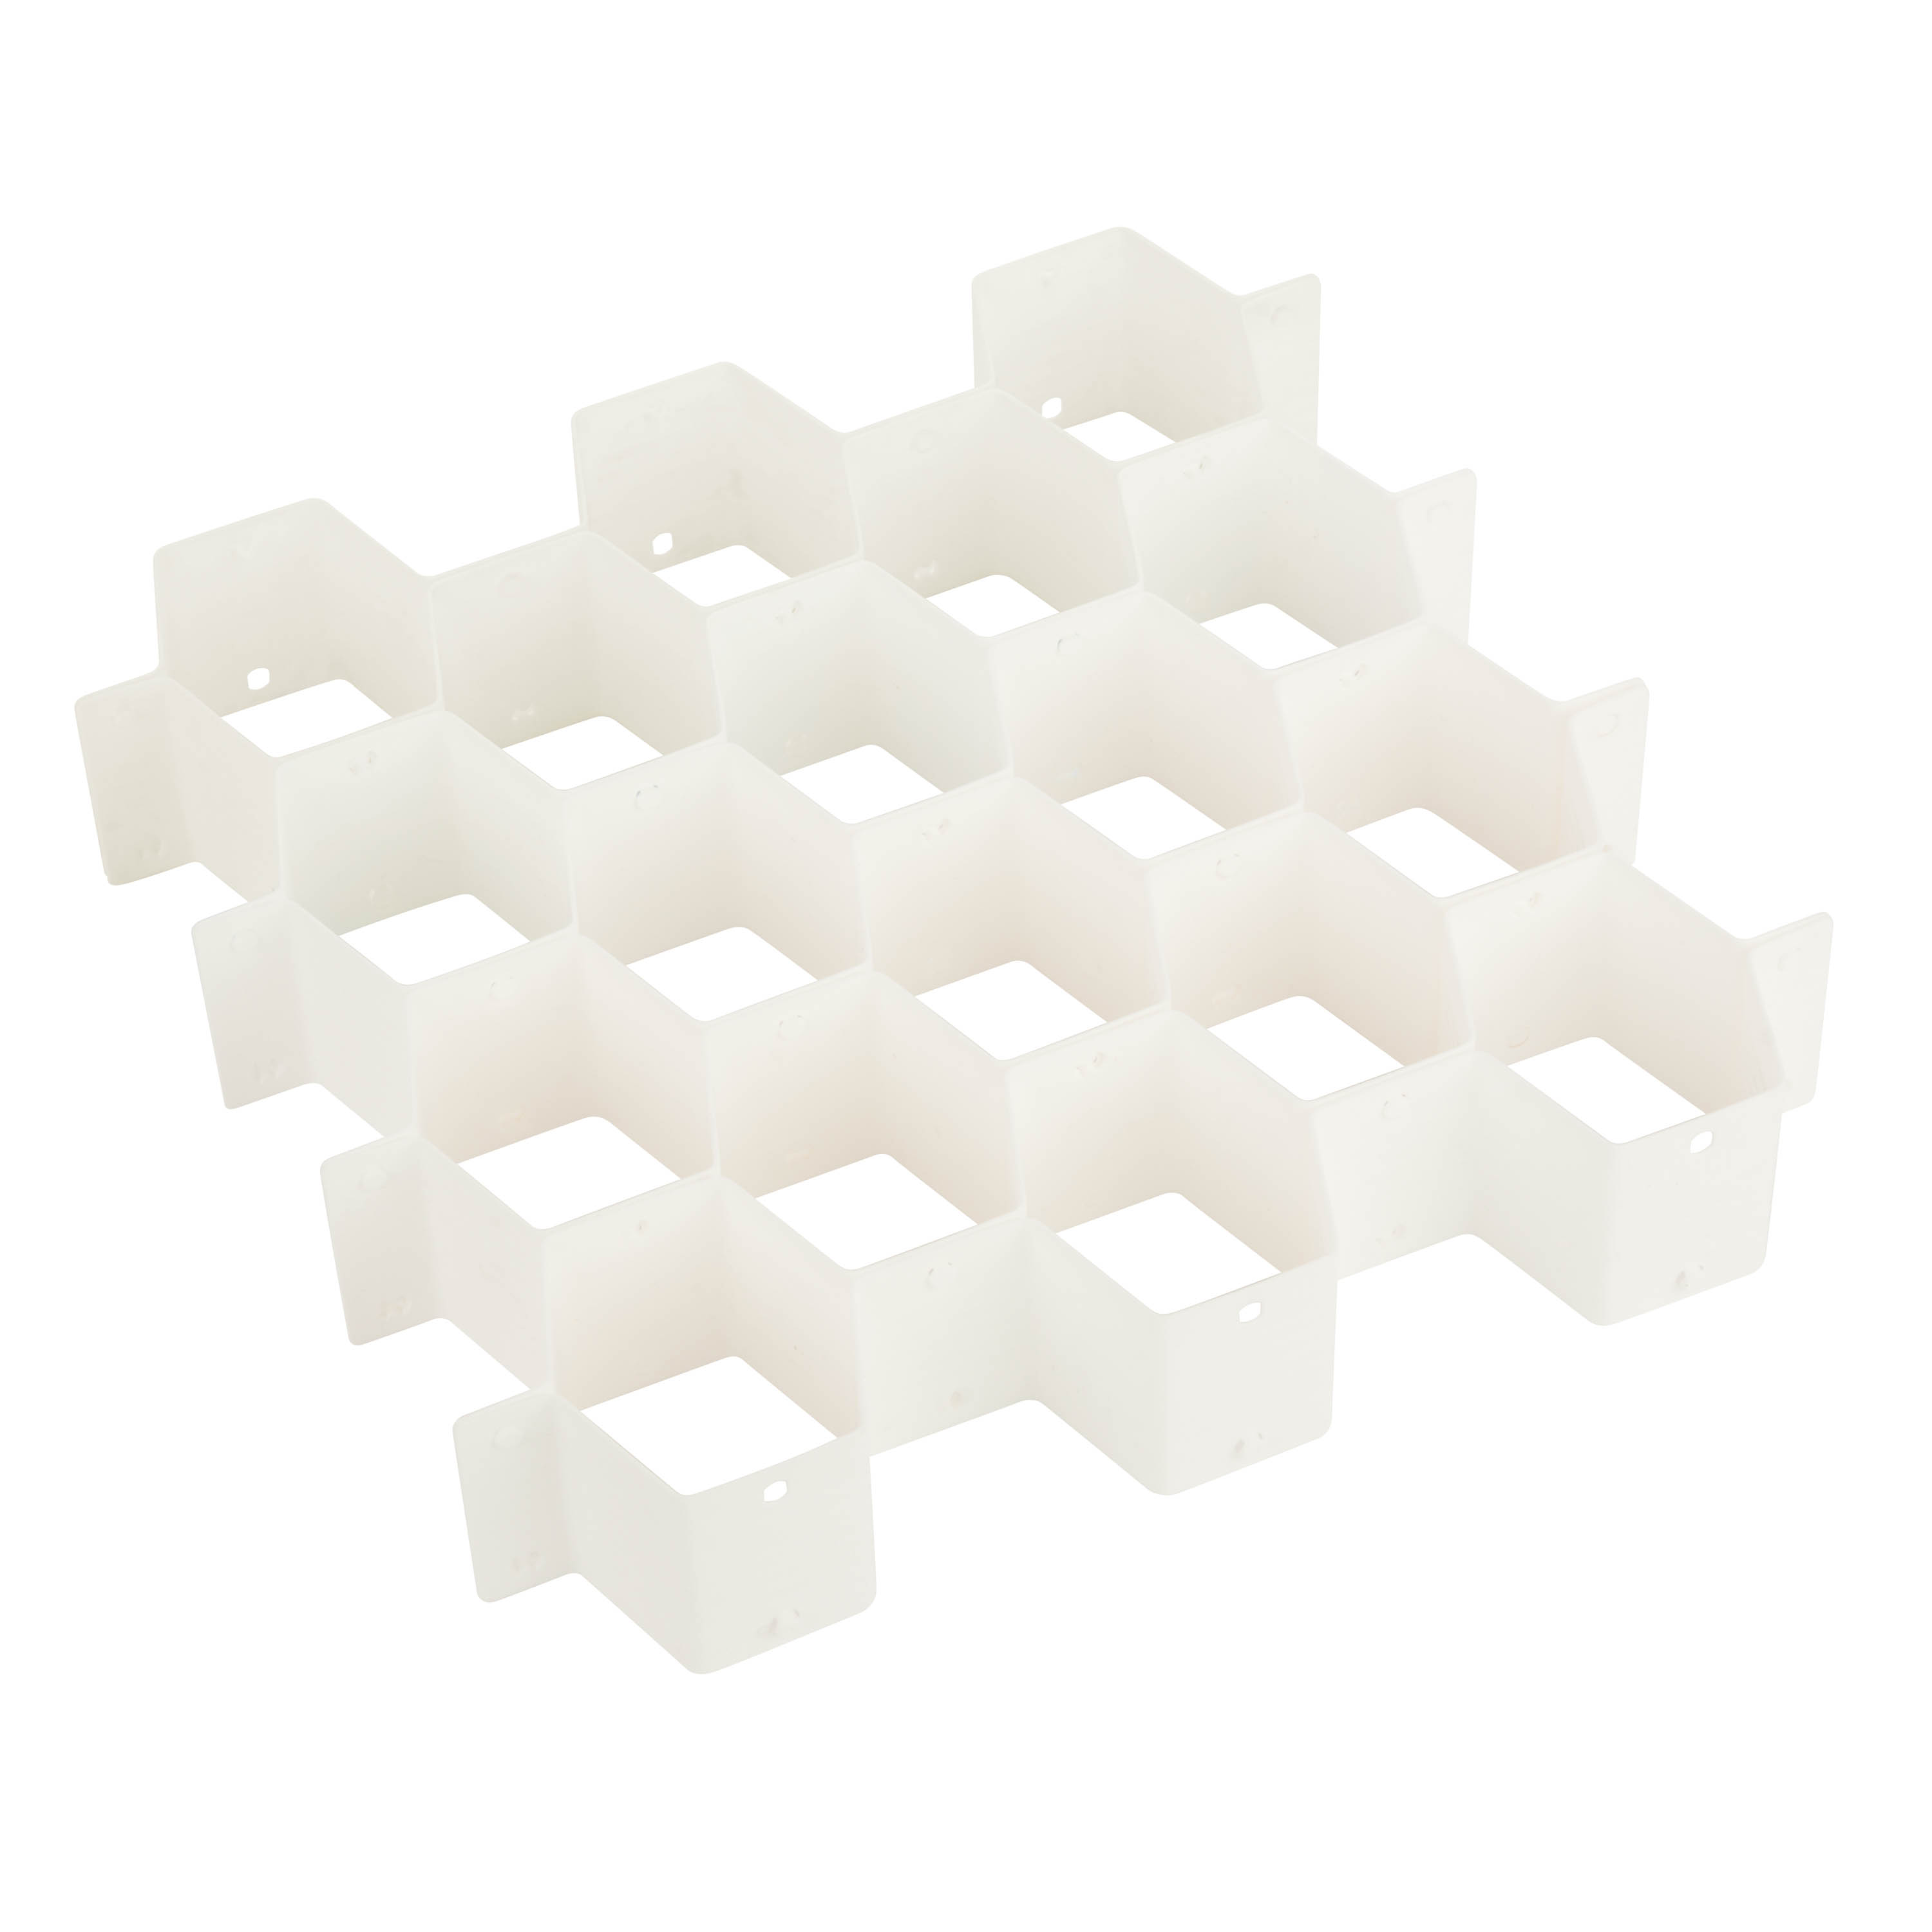 Honey-Can-Do Plastic Modular 32-Compartment Drawer Organizer for Clothes, White - image 1 of 4